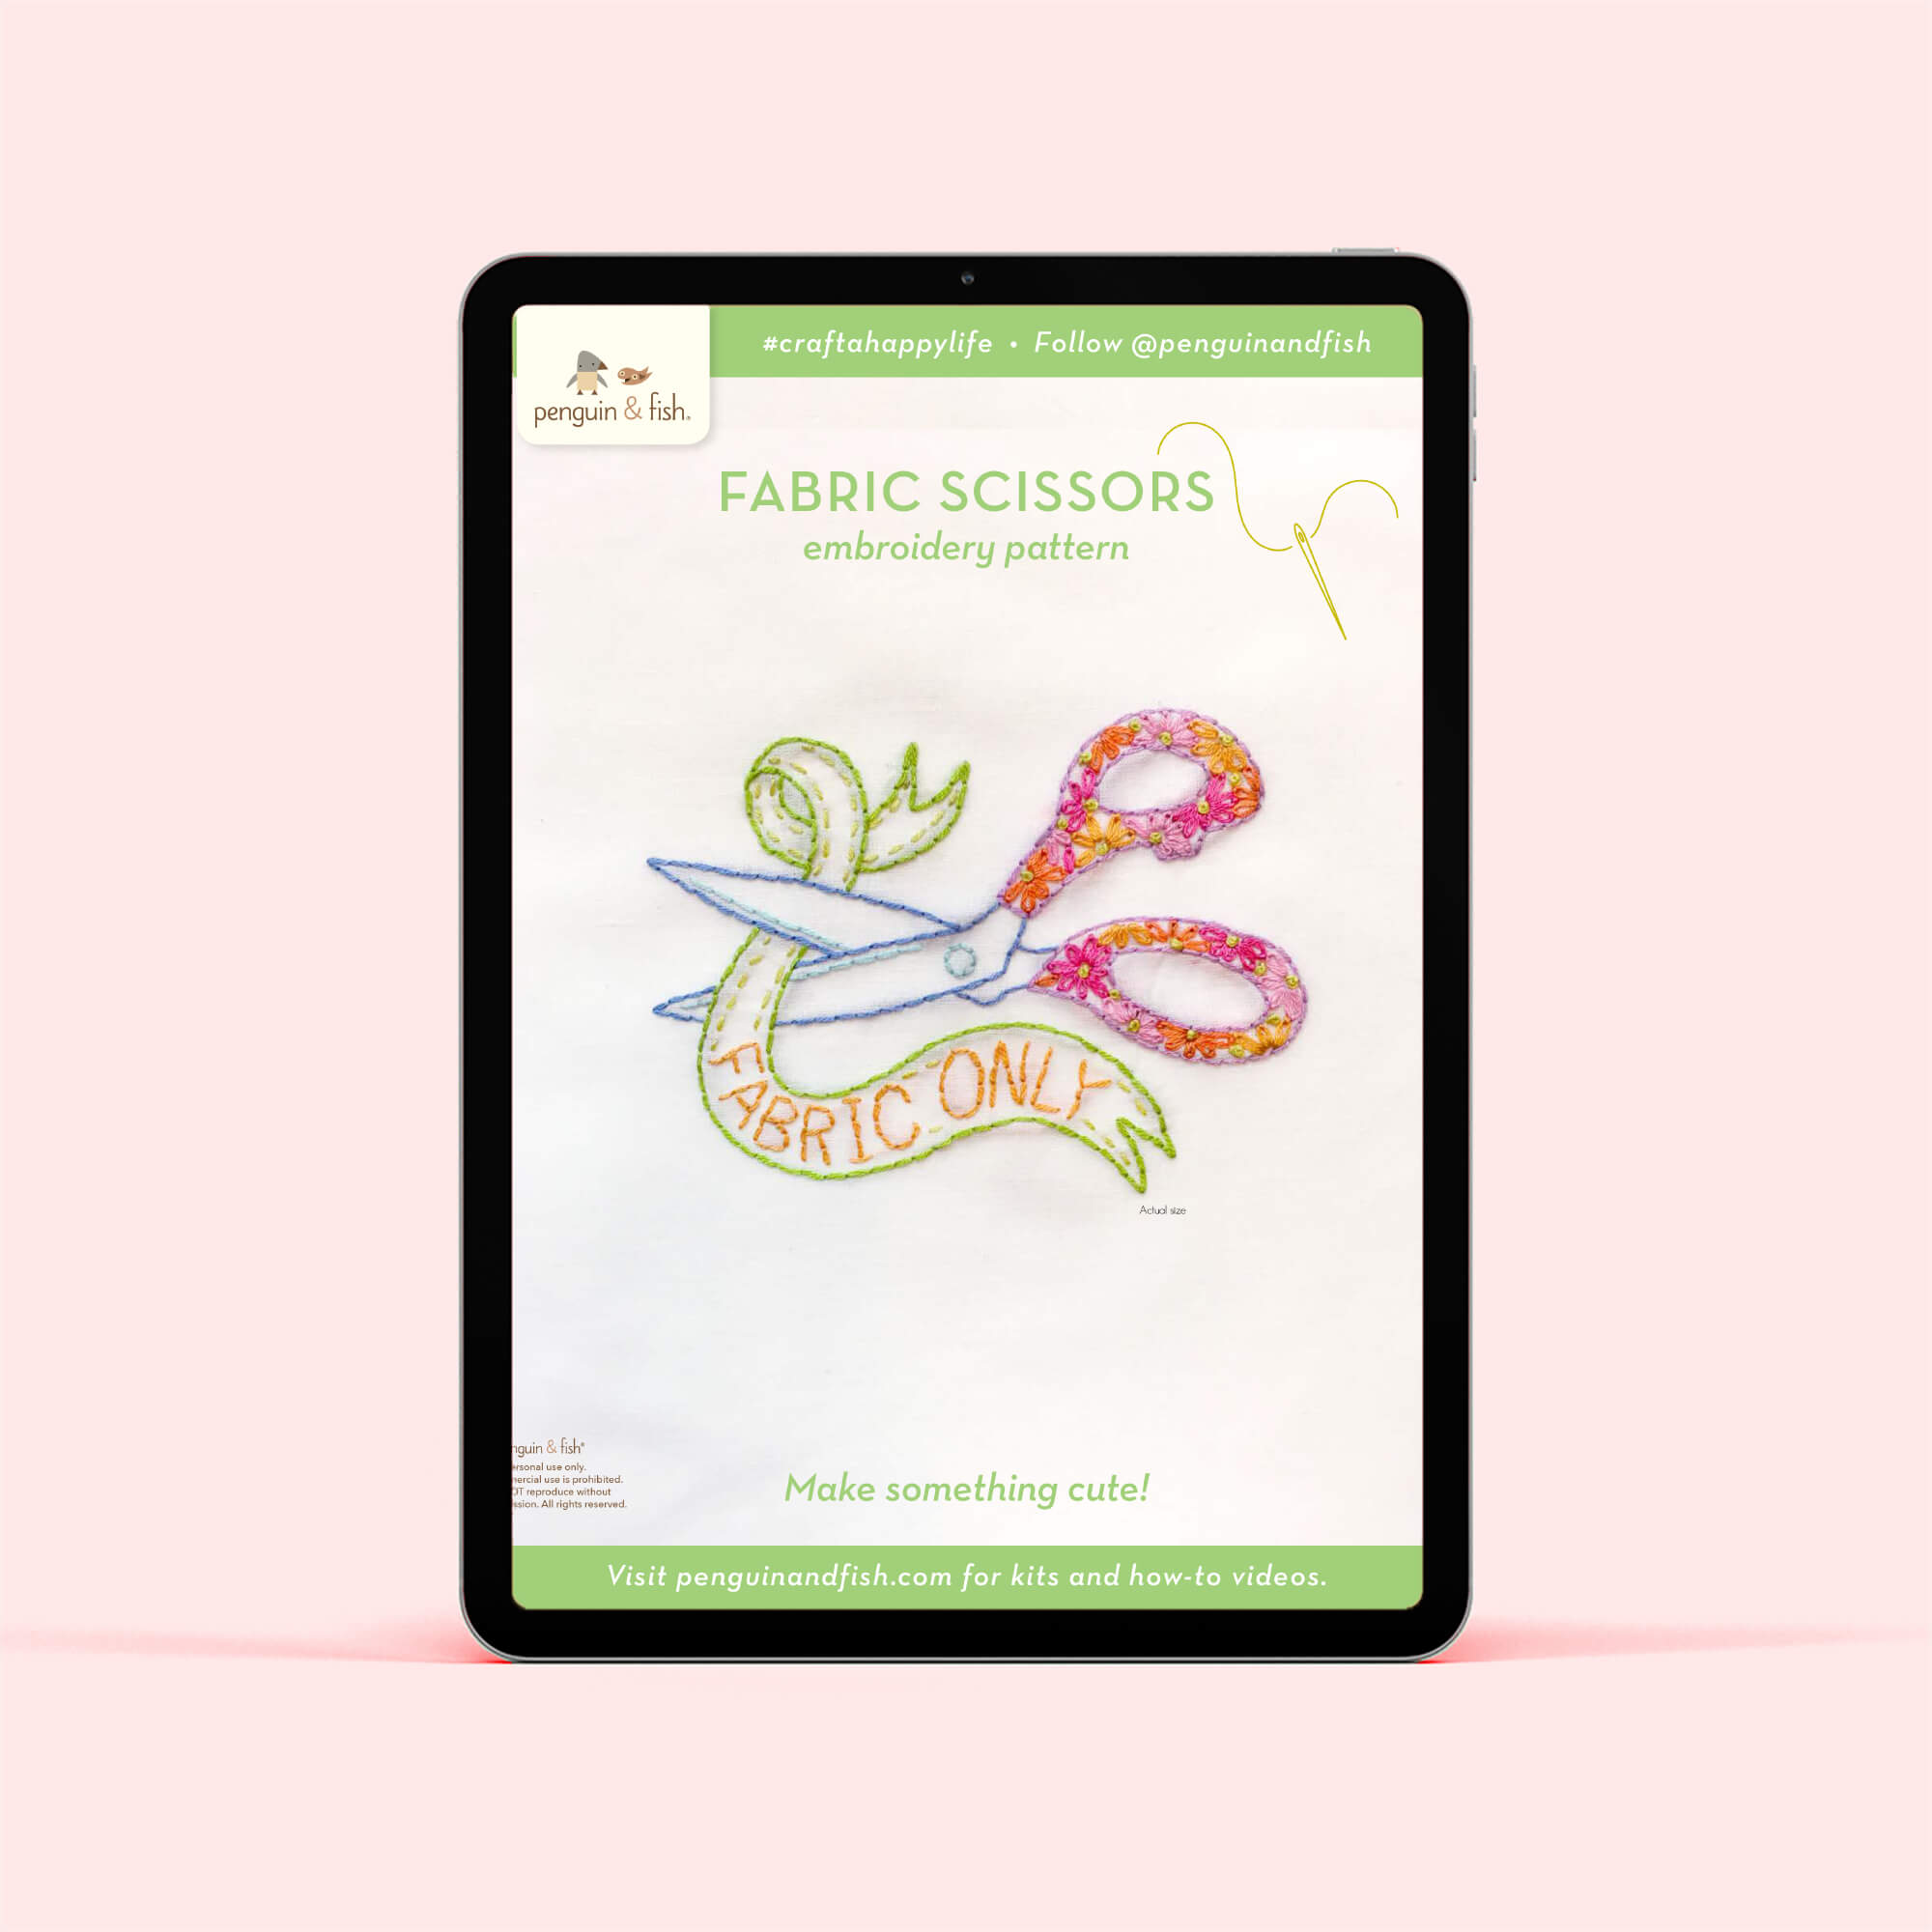 Fabric Scissors PDF embroidery pattern shown on a tablet